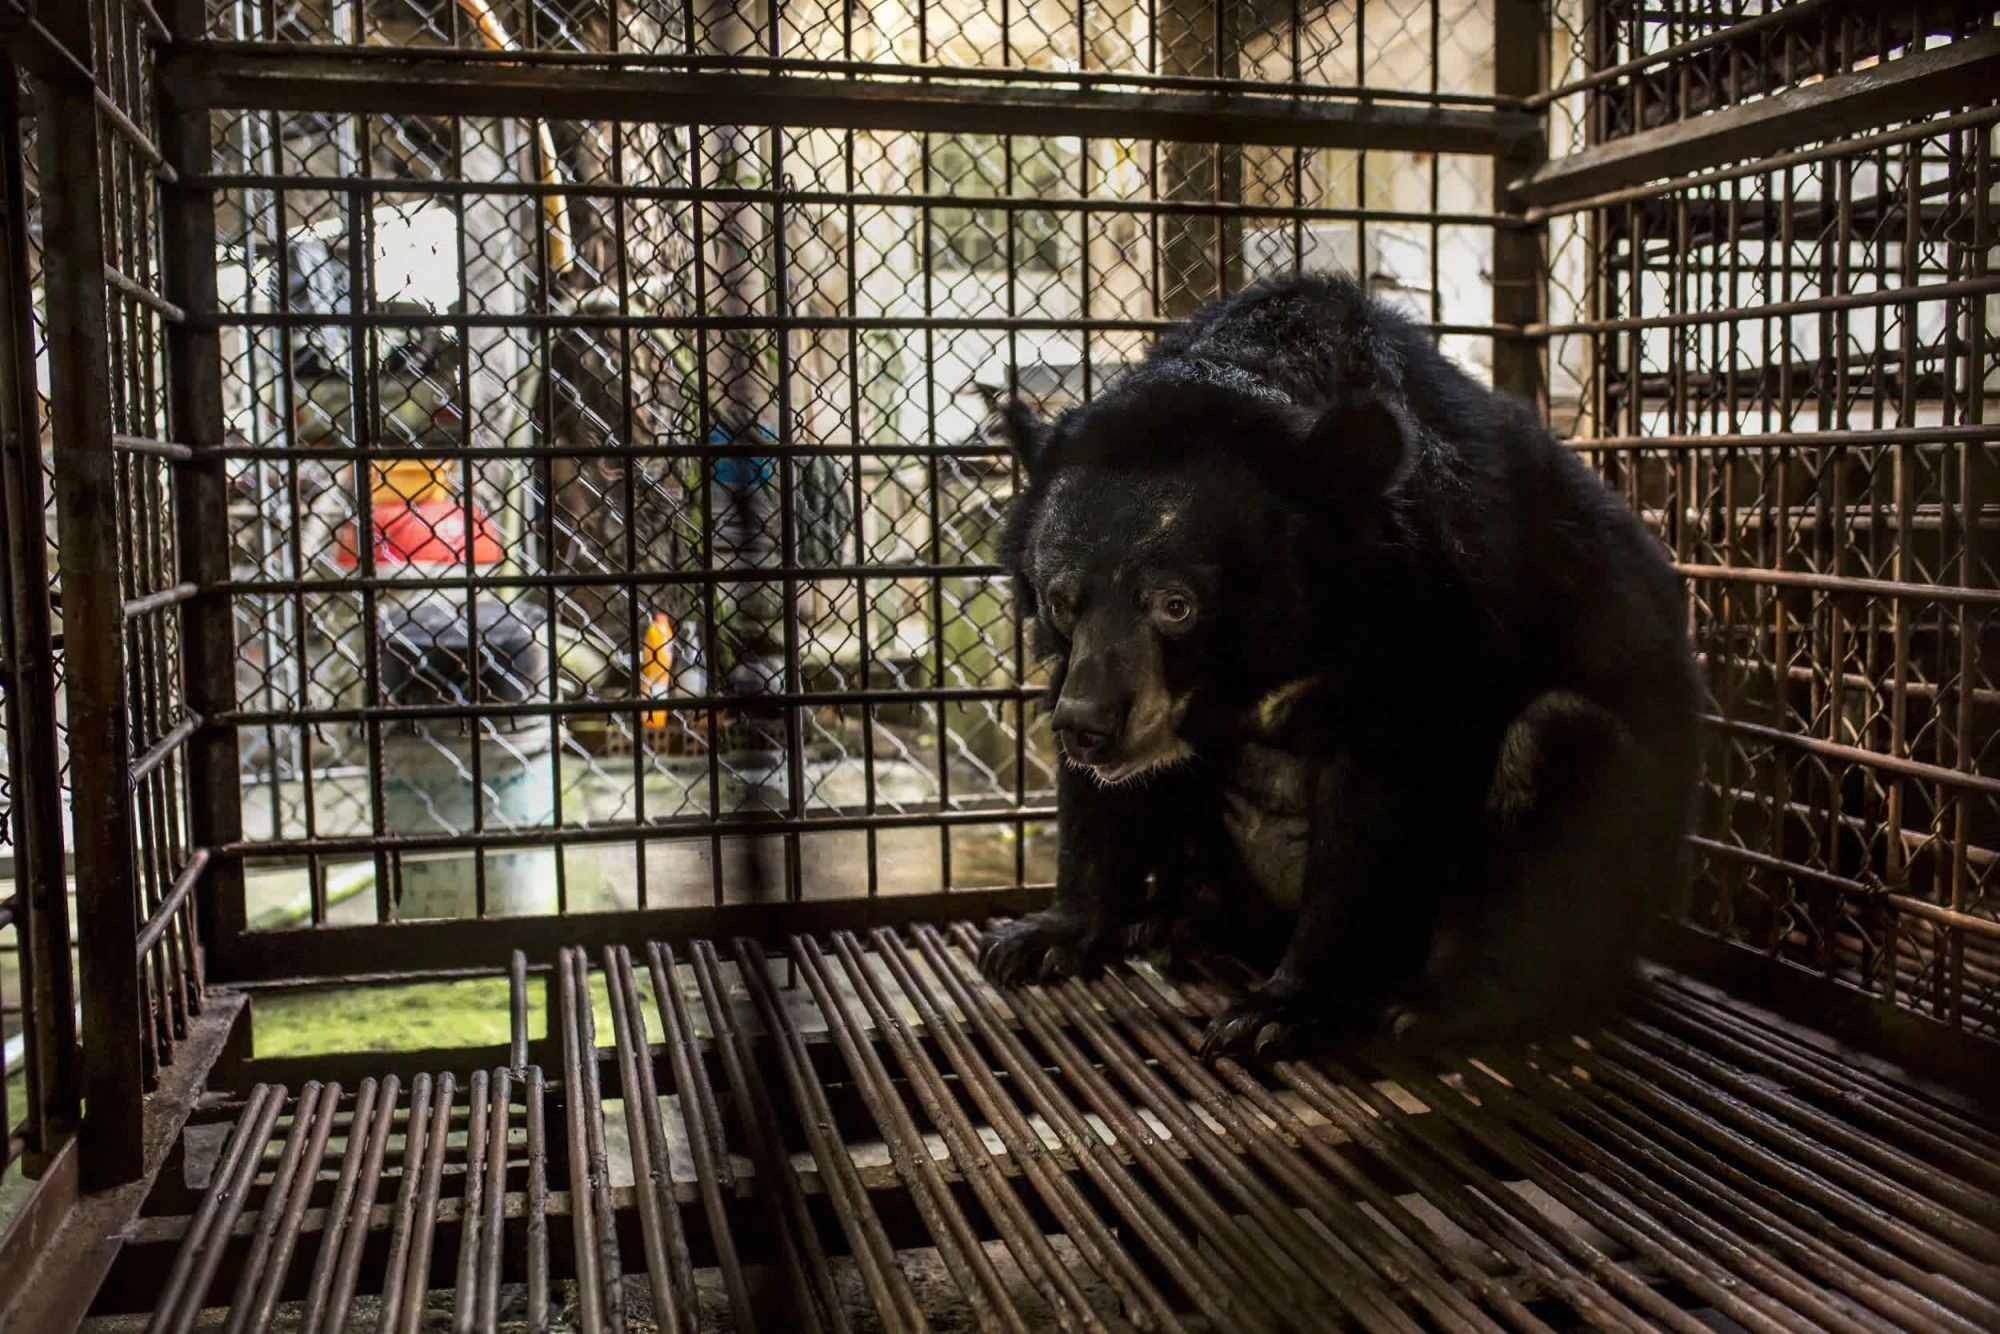 This Asiatic black bear has been kept captive in a very small cage for her entire life and used for bile until the extraction was made illegal in Vietnam in 2005.